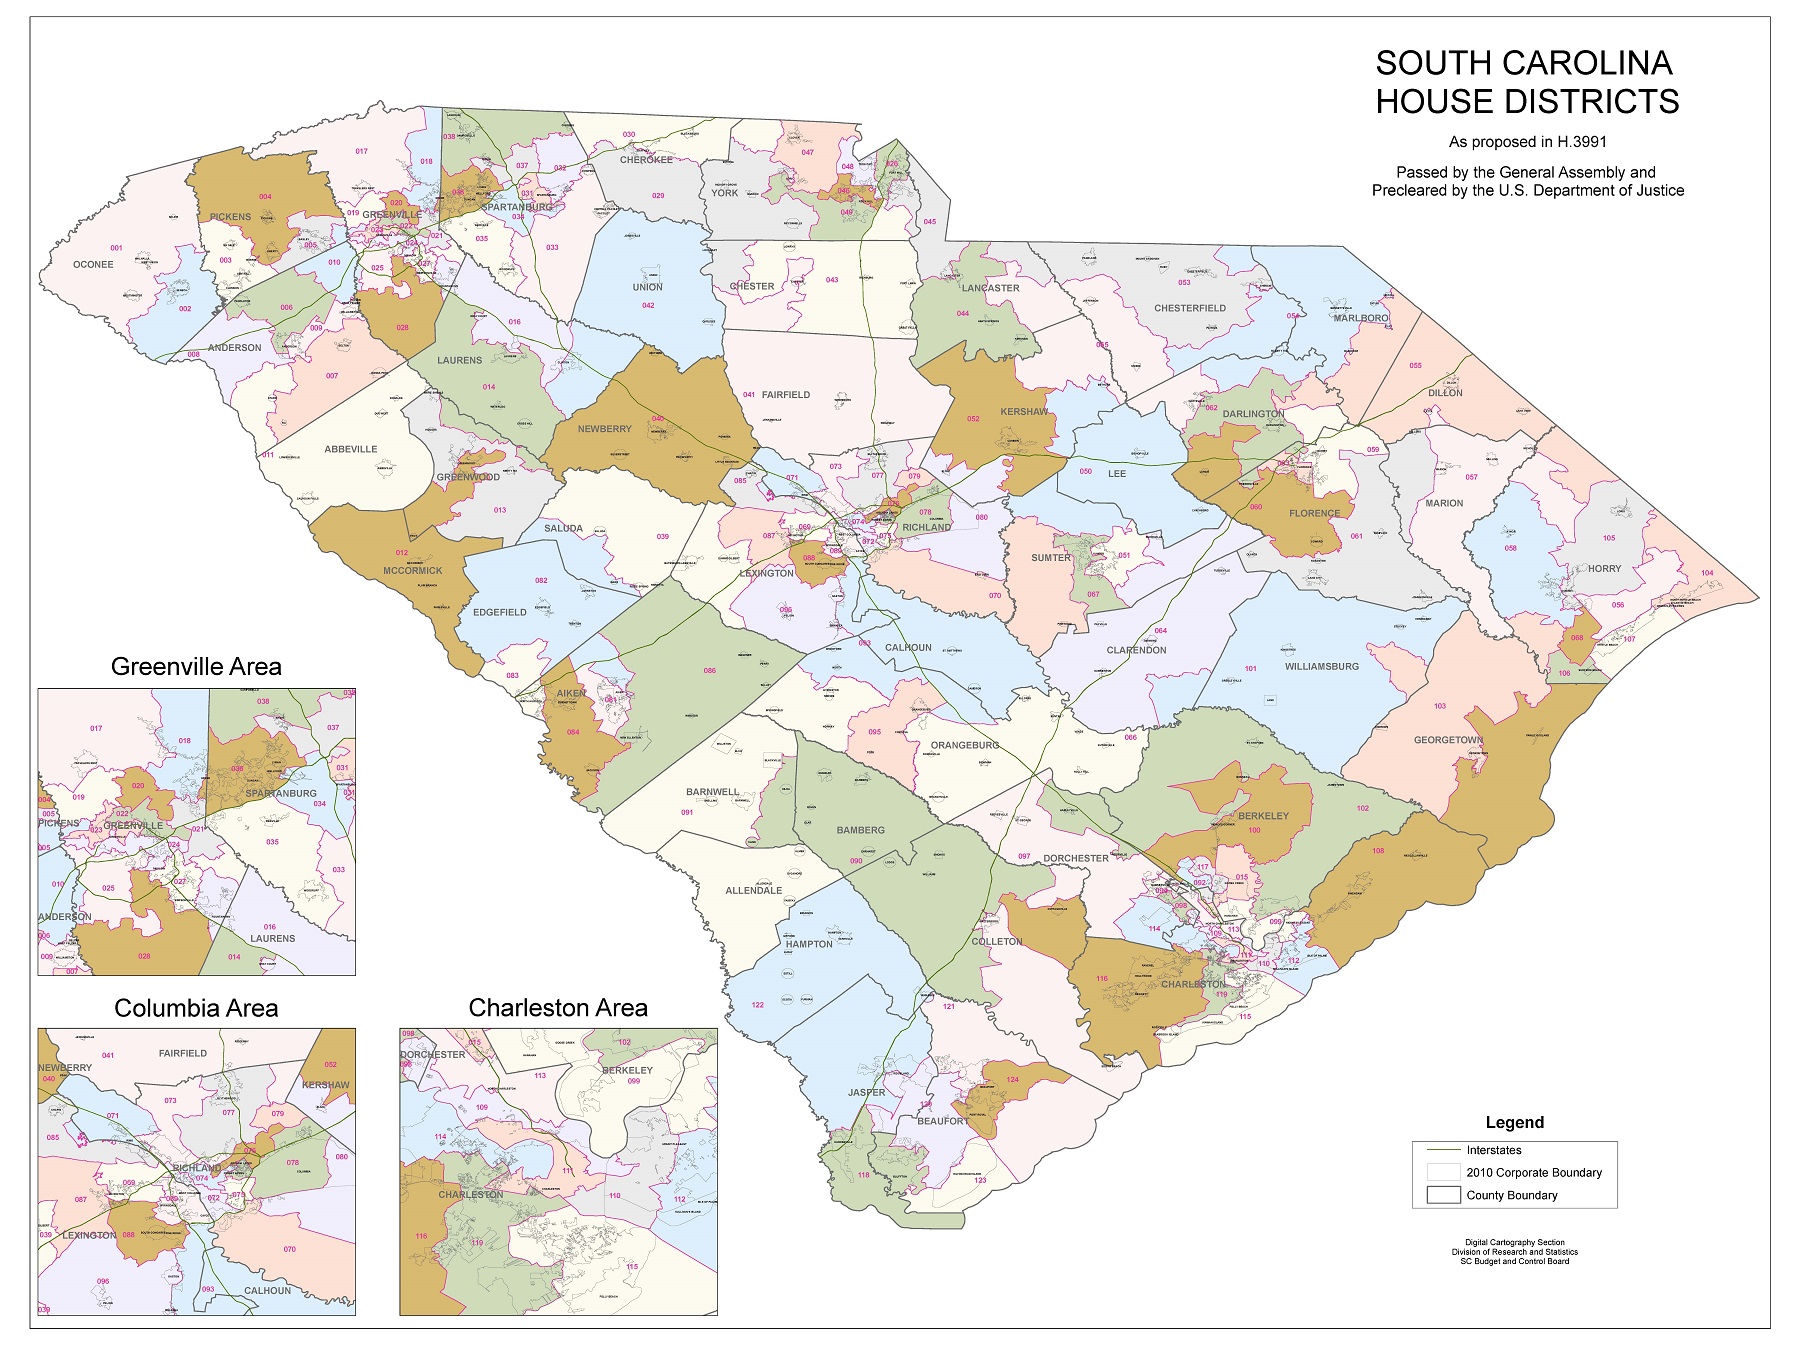 State redistricting information for South Carolina